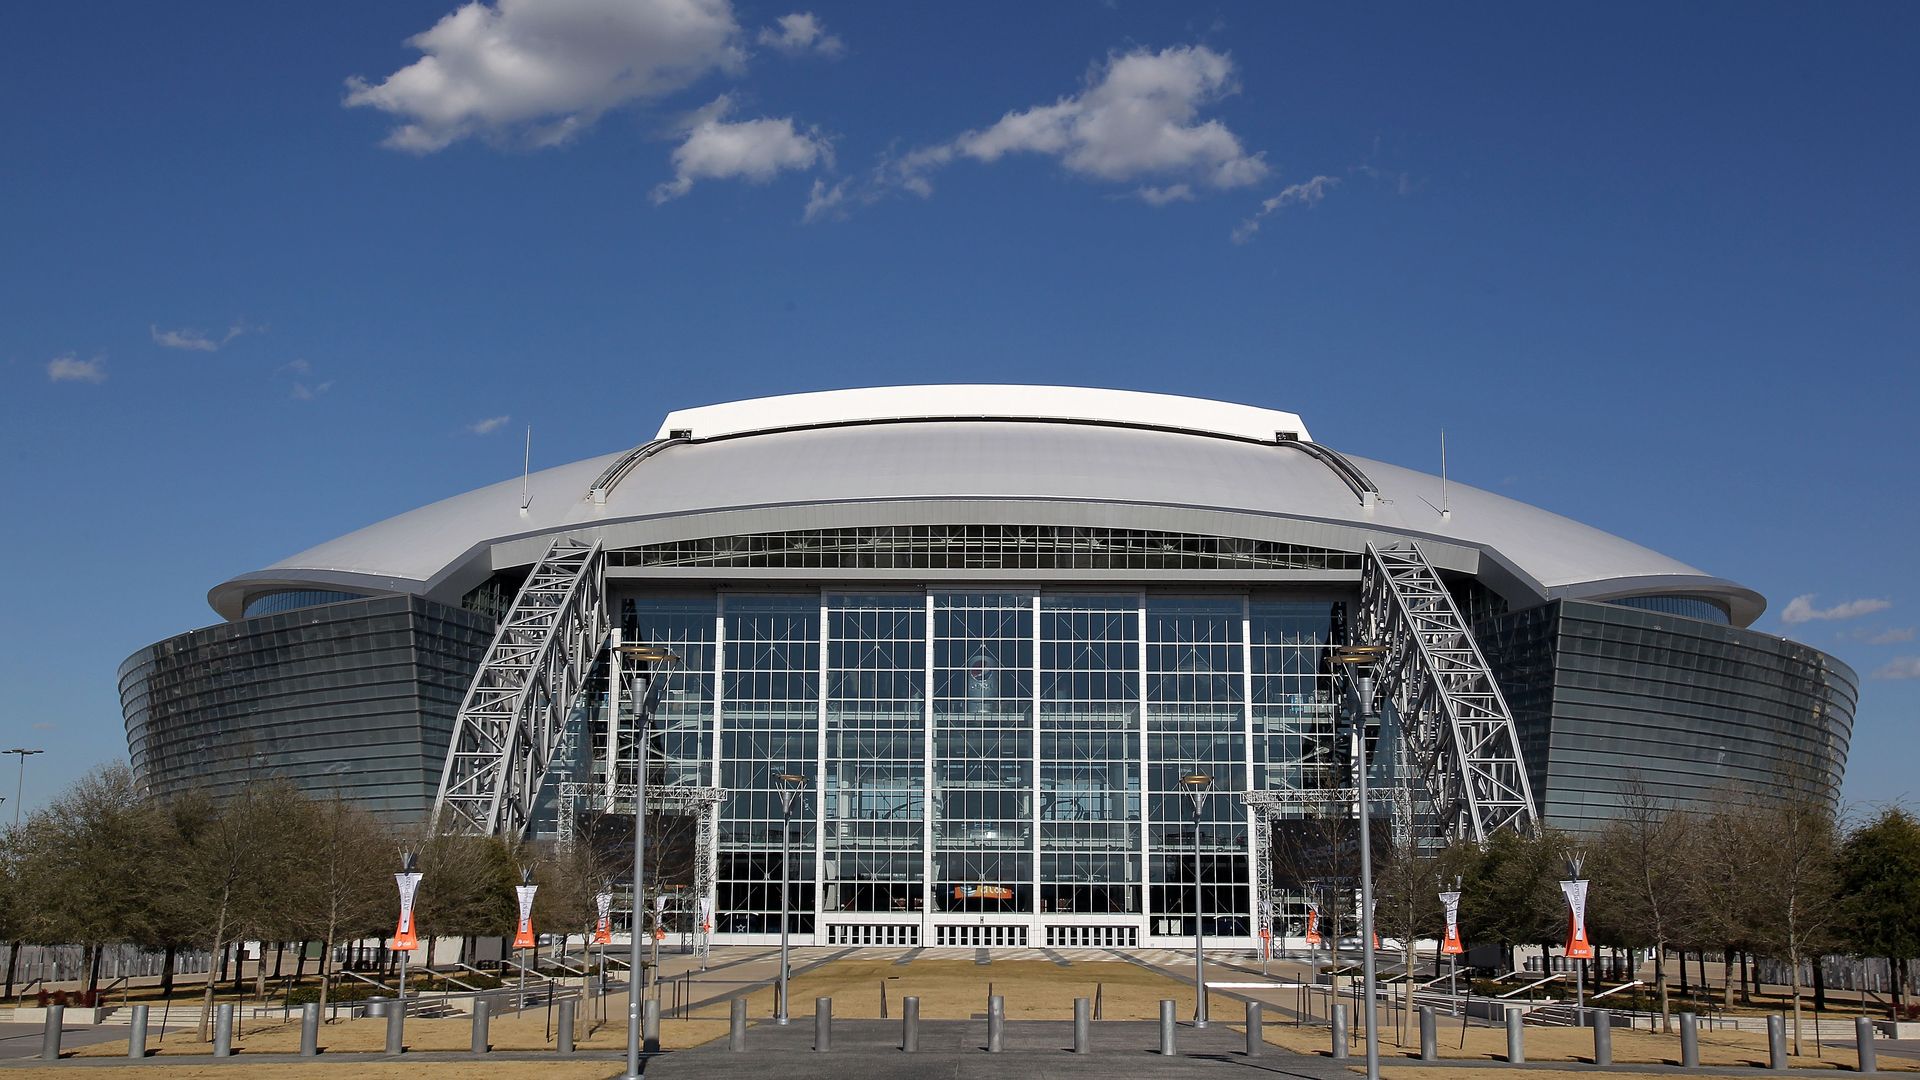 A giant stadium in front of a bright blue sky